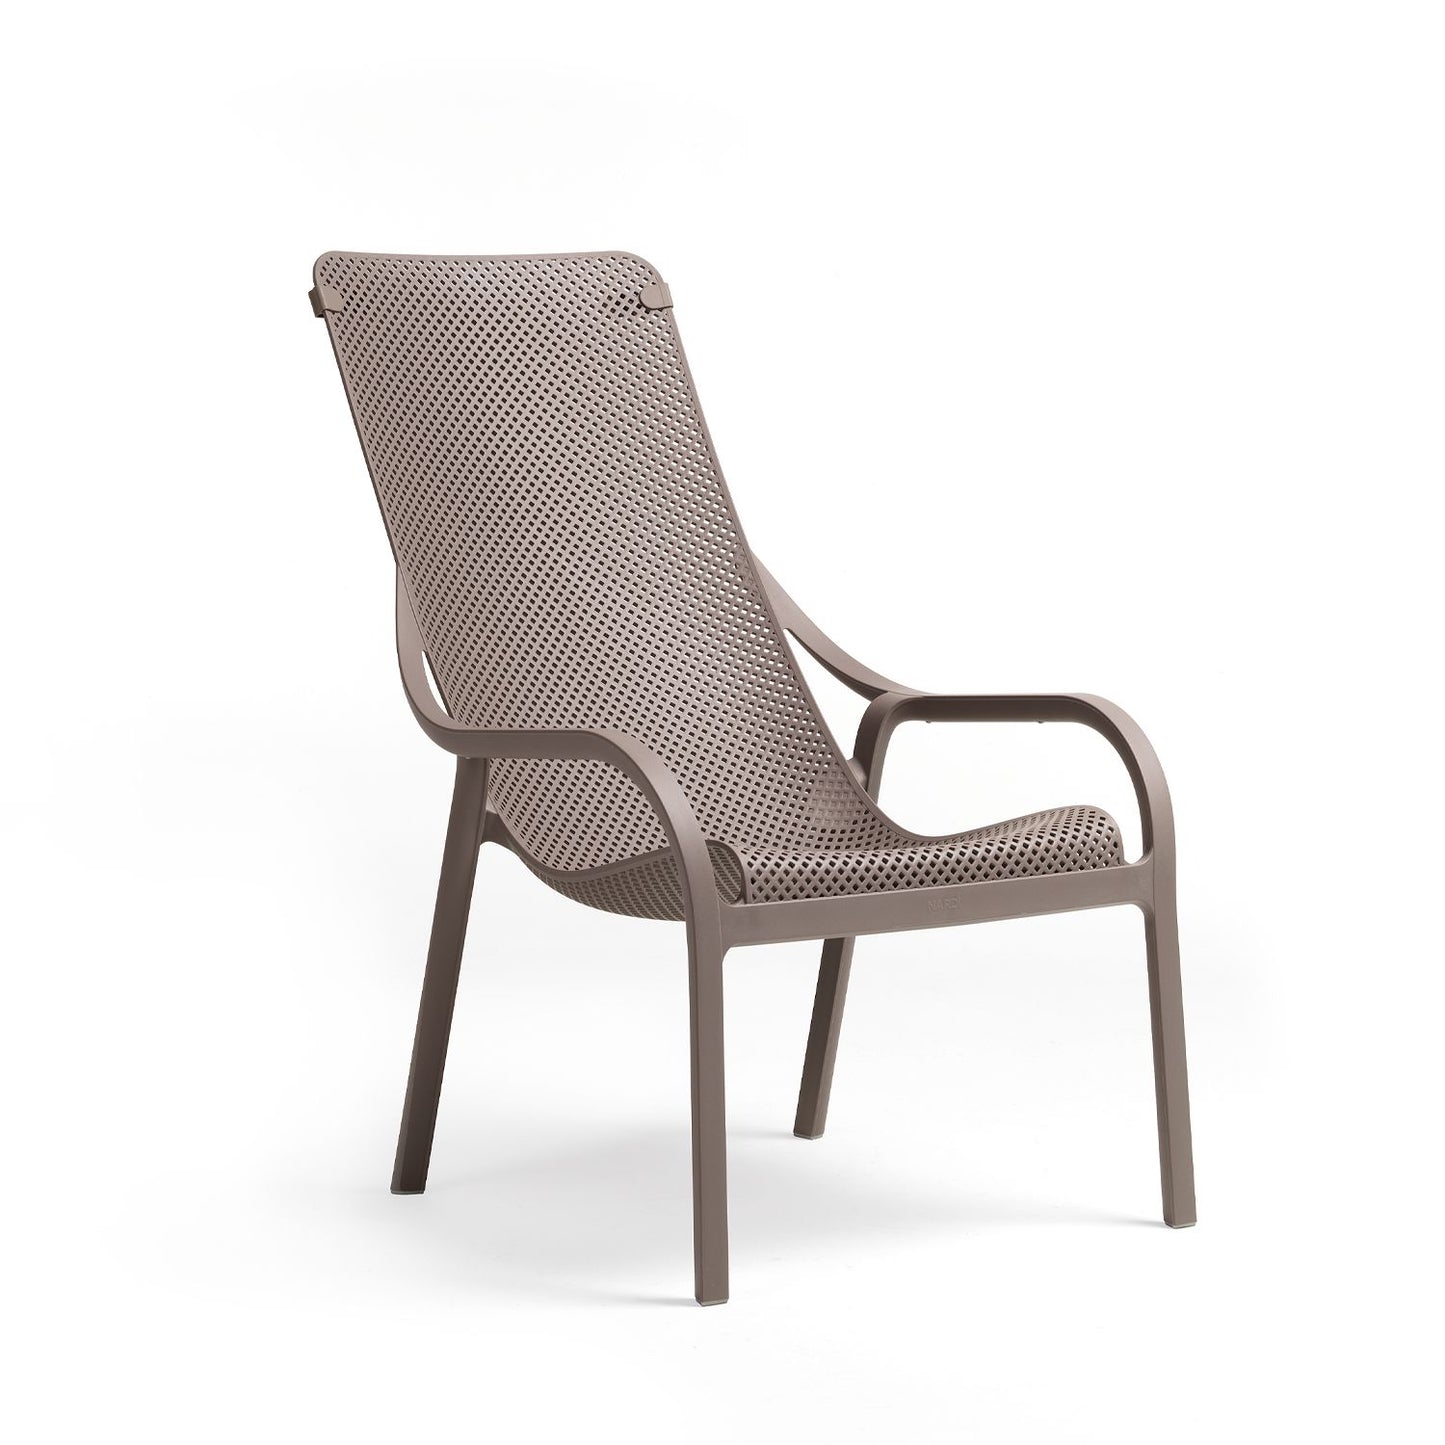 Net Lounge Chair By Nardi - Taupe